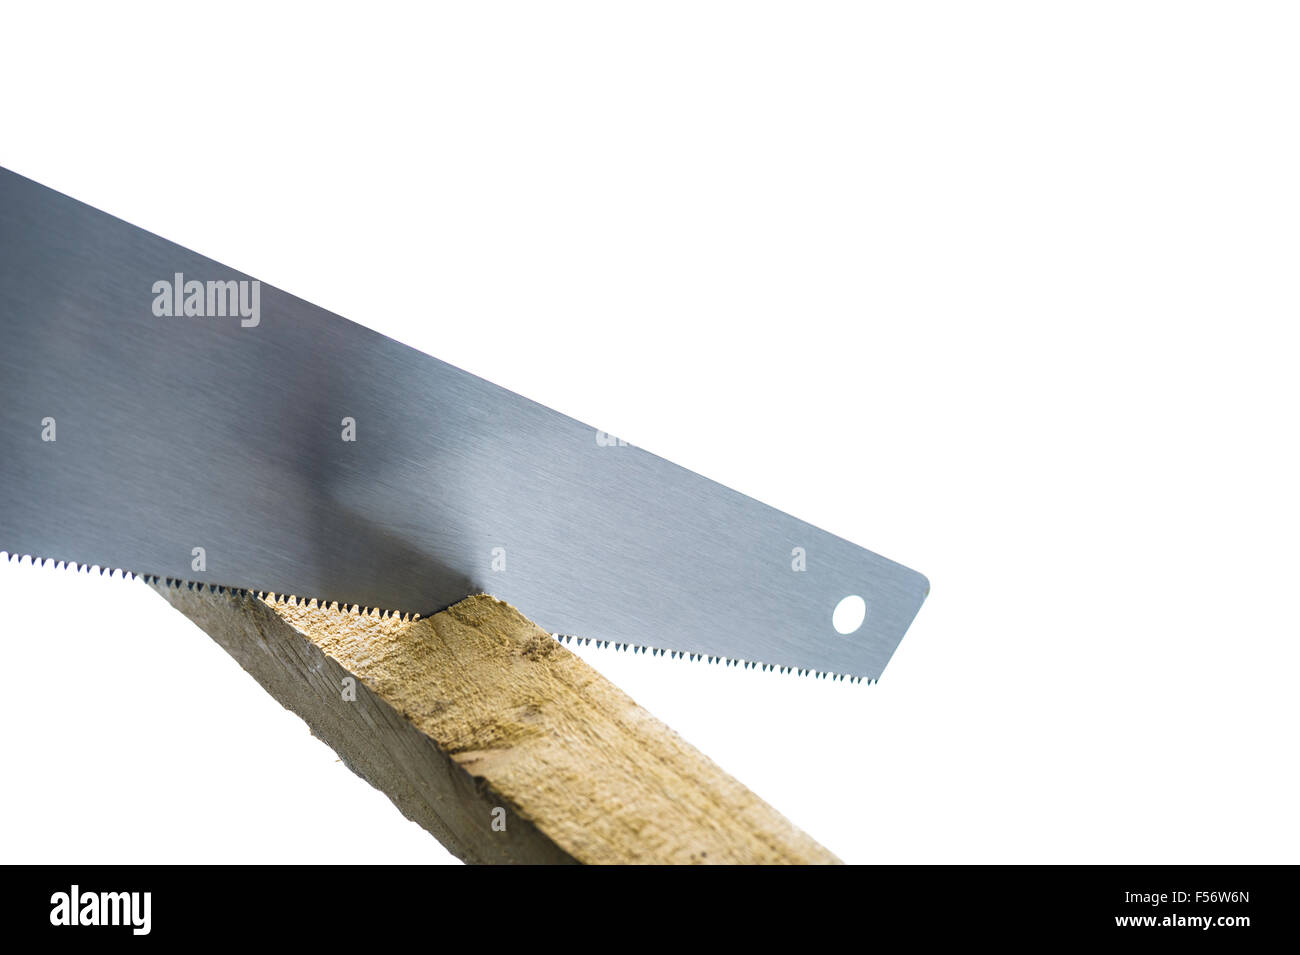 Hand saw cutting some timber. Stock Photo